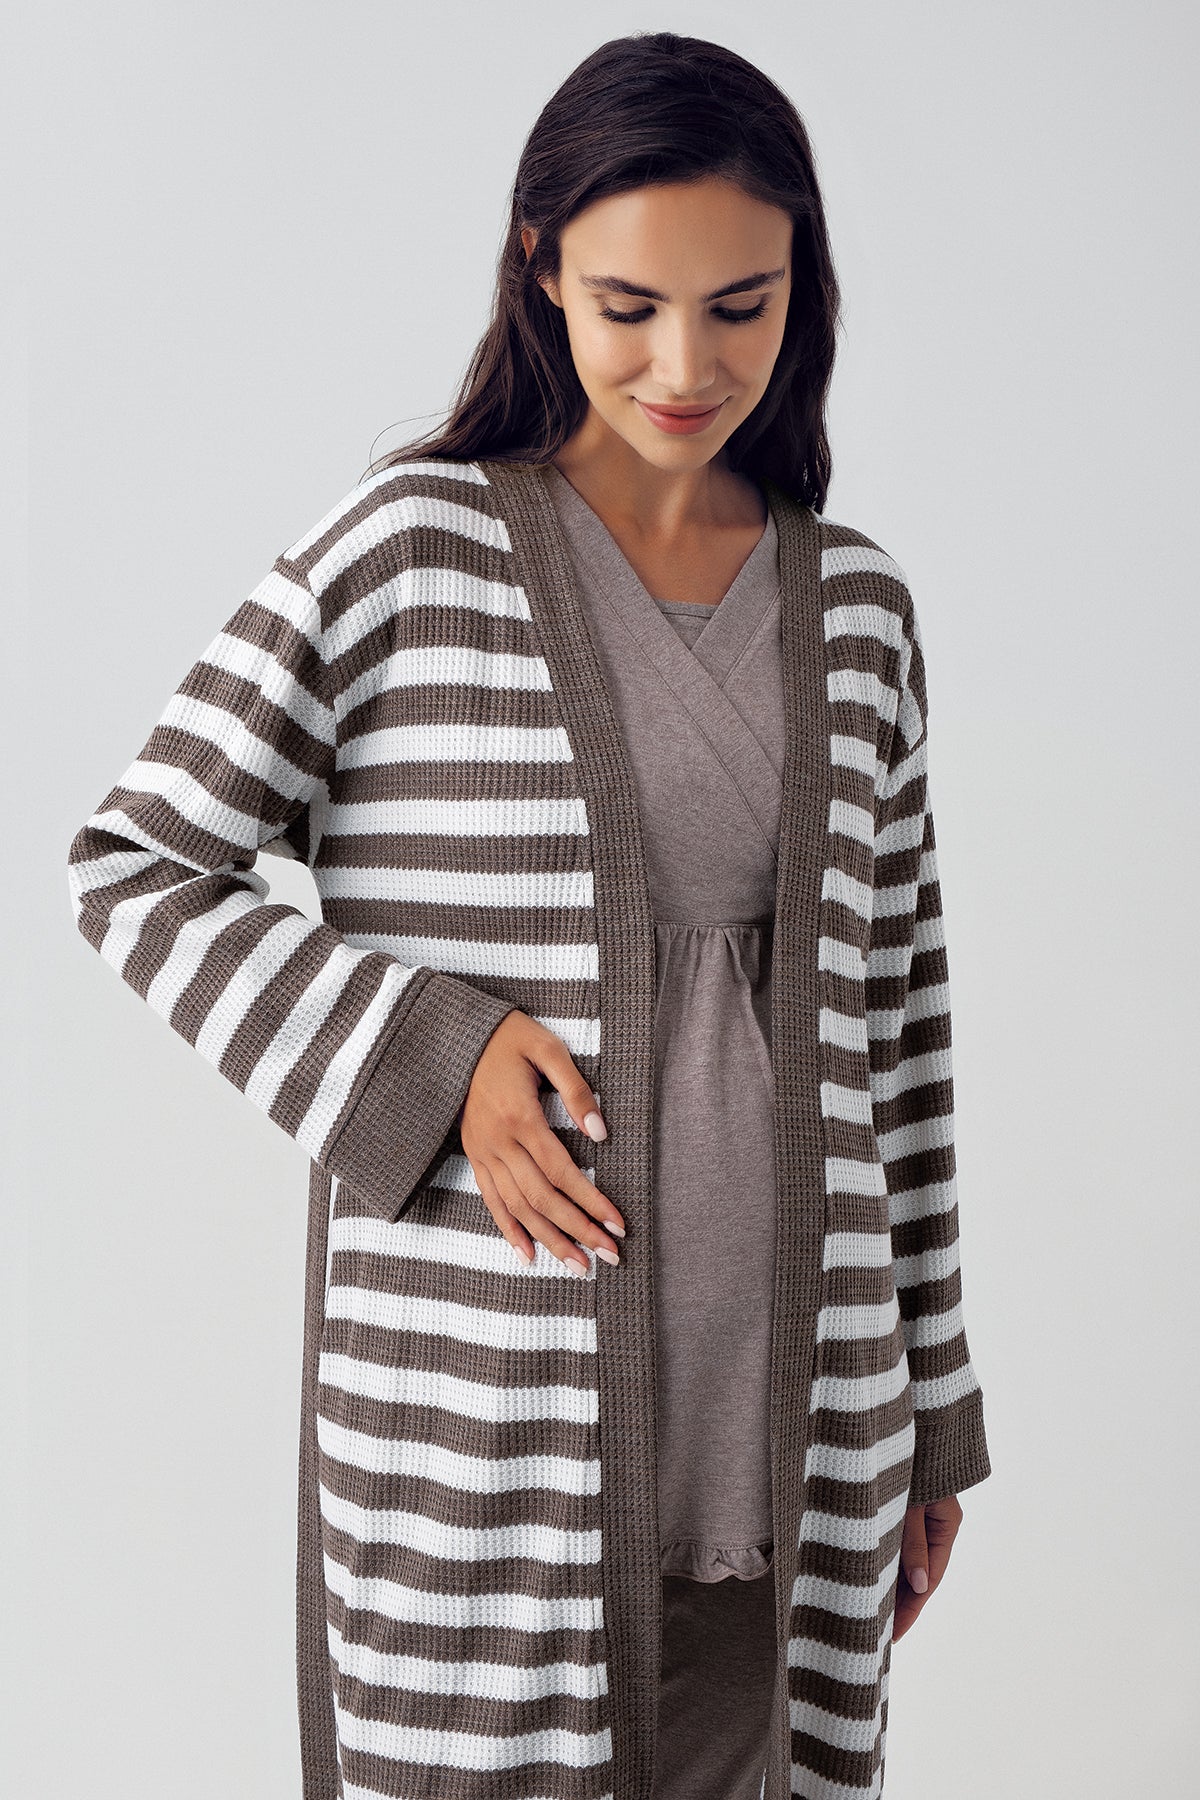 Shopymommy 15301 Double Breasted 3-Pieces Maternity & Nursing Pajamas With Knitwear Robe Coffee